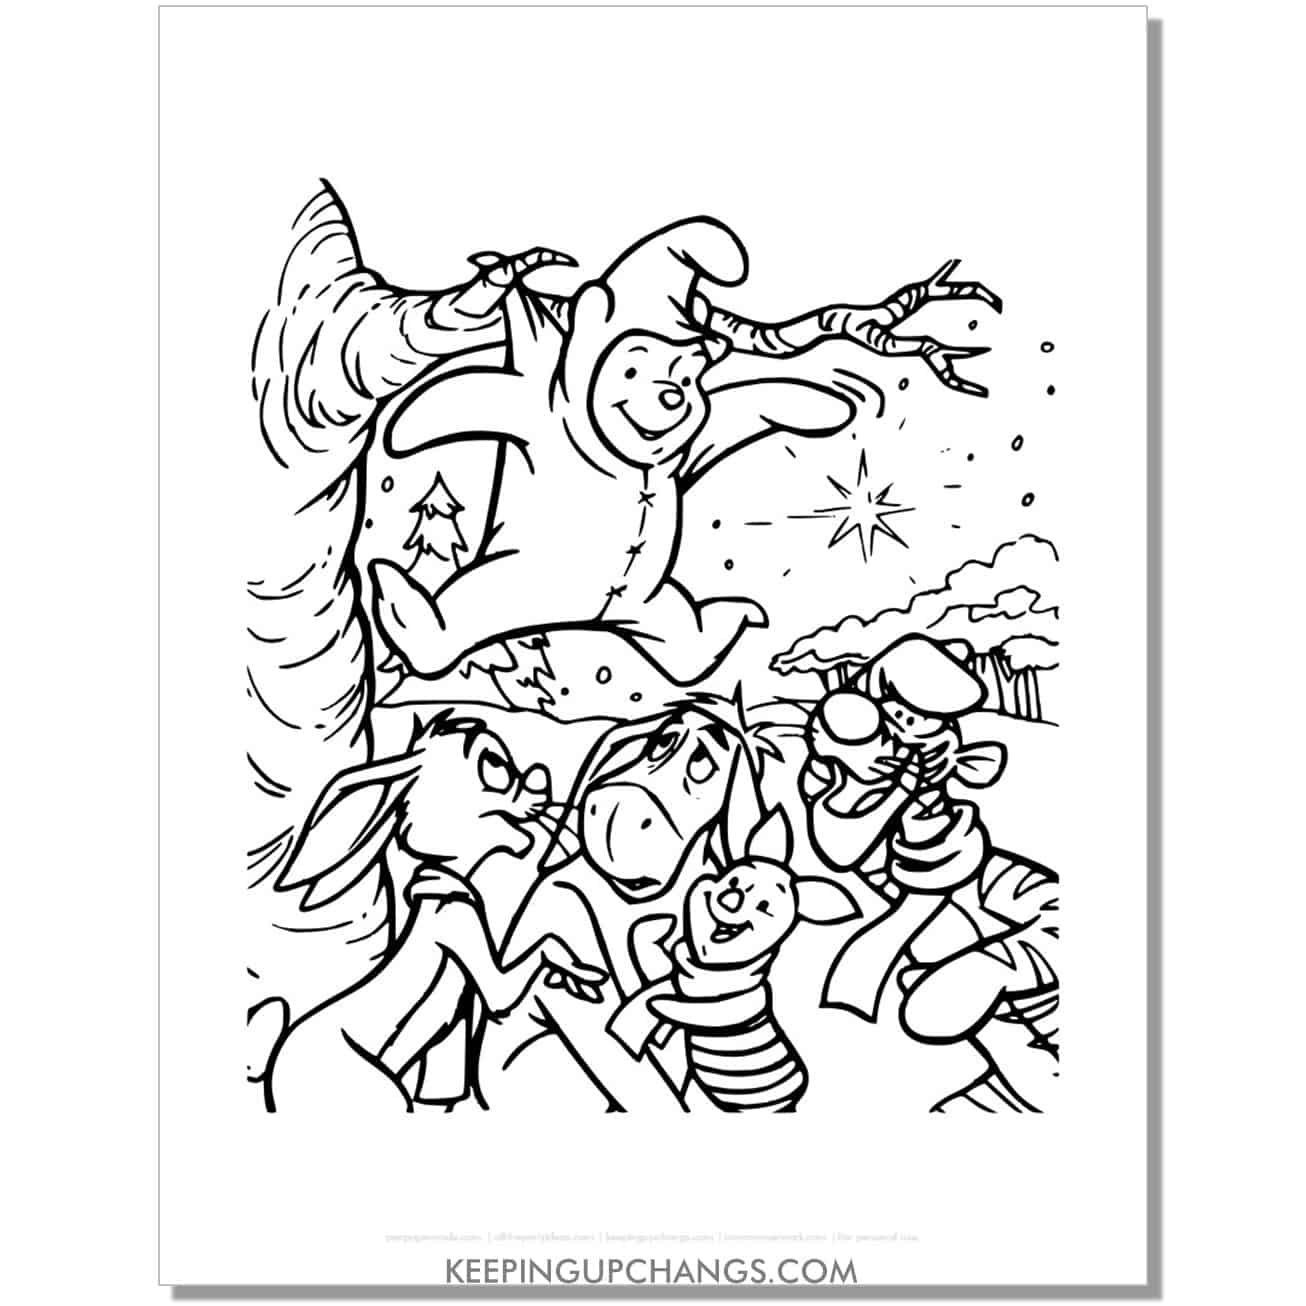 free winnie the pooh, tigger, piglet, eeyore, rabbit in winter coloring page.